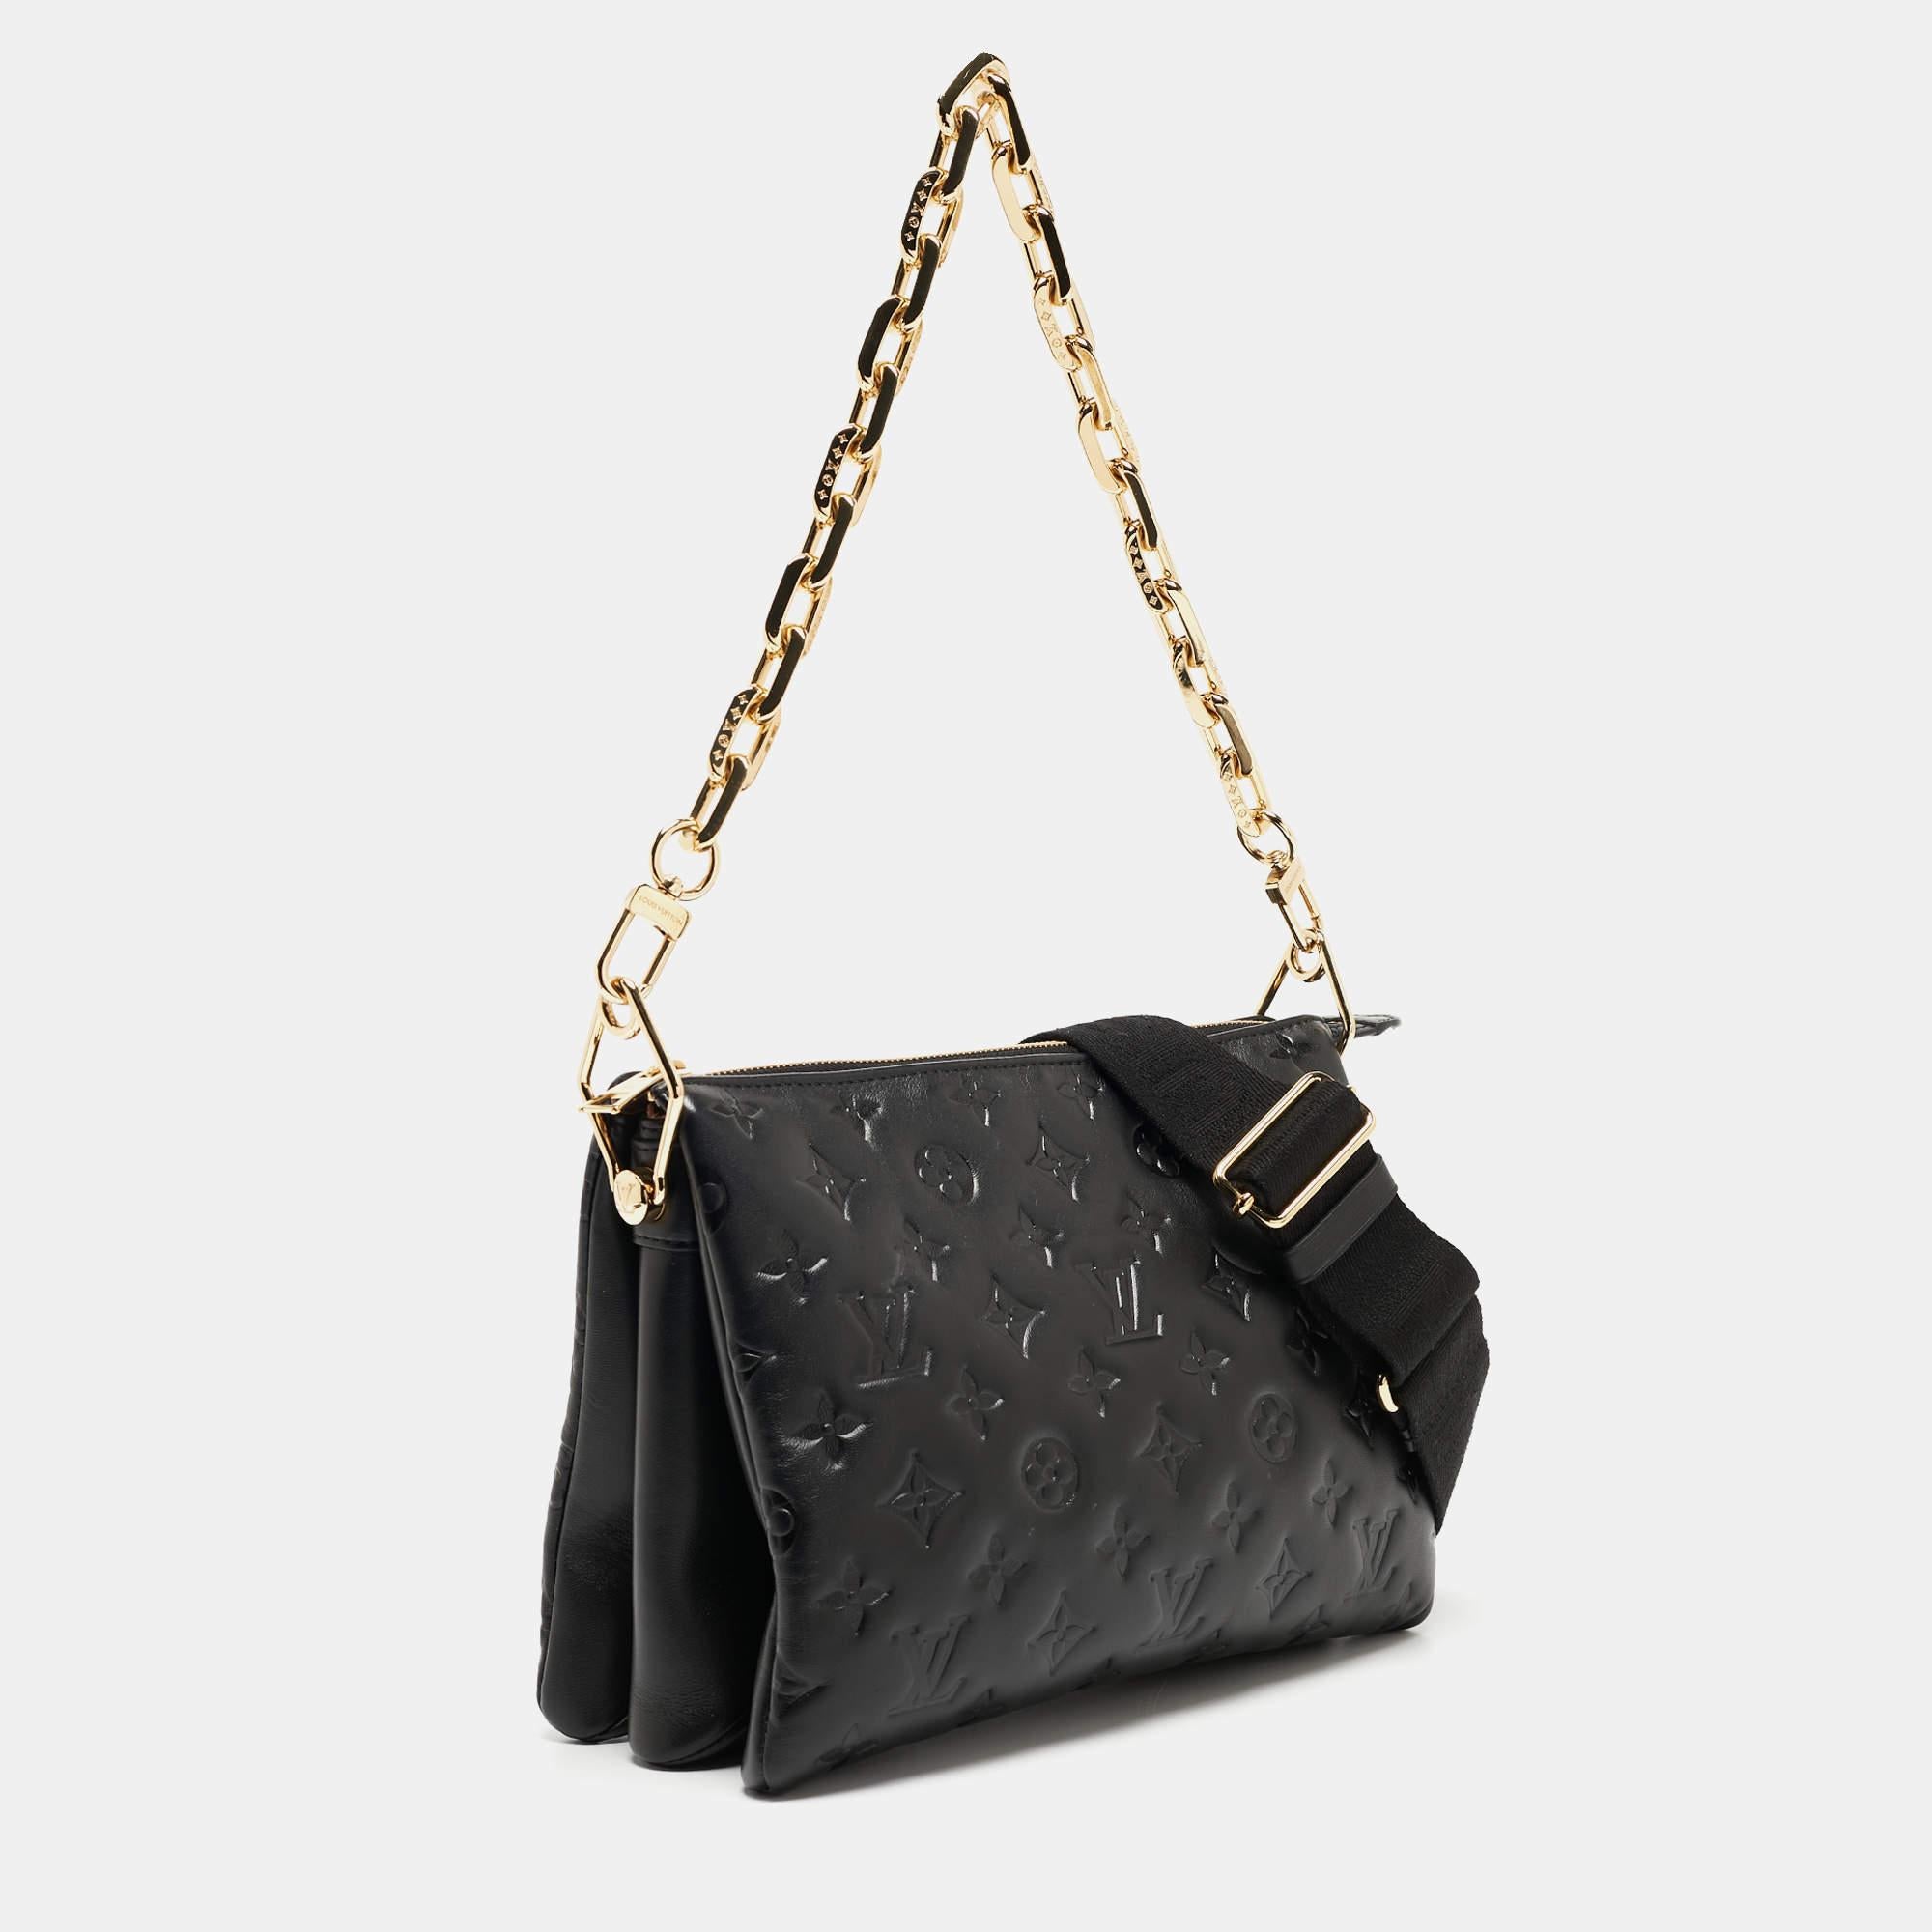 With a Louis Vuitton bag by your side, it's going to be a stylish OOTD no matter the day. Here, we have this LV Coussin PM bag just for you. Its classy shape, notable details, and simple elegance make it a worthy purchase and a versatile accessory.

